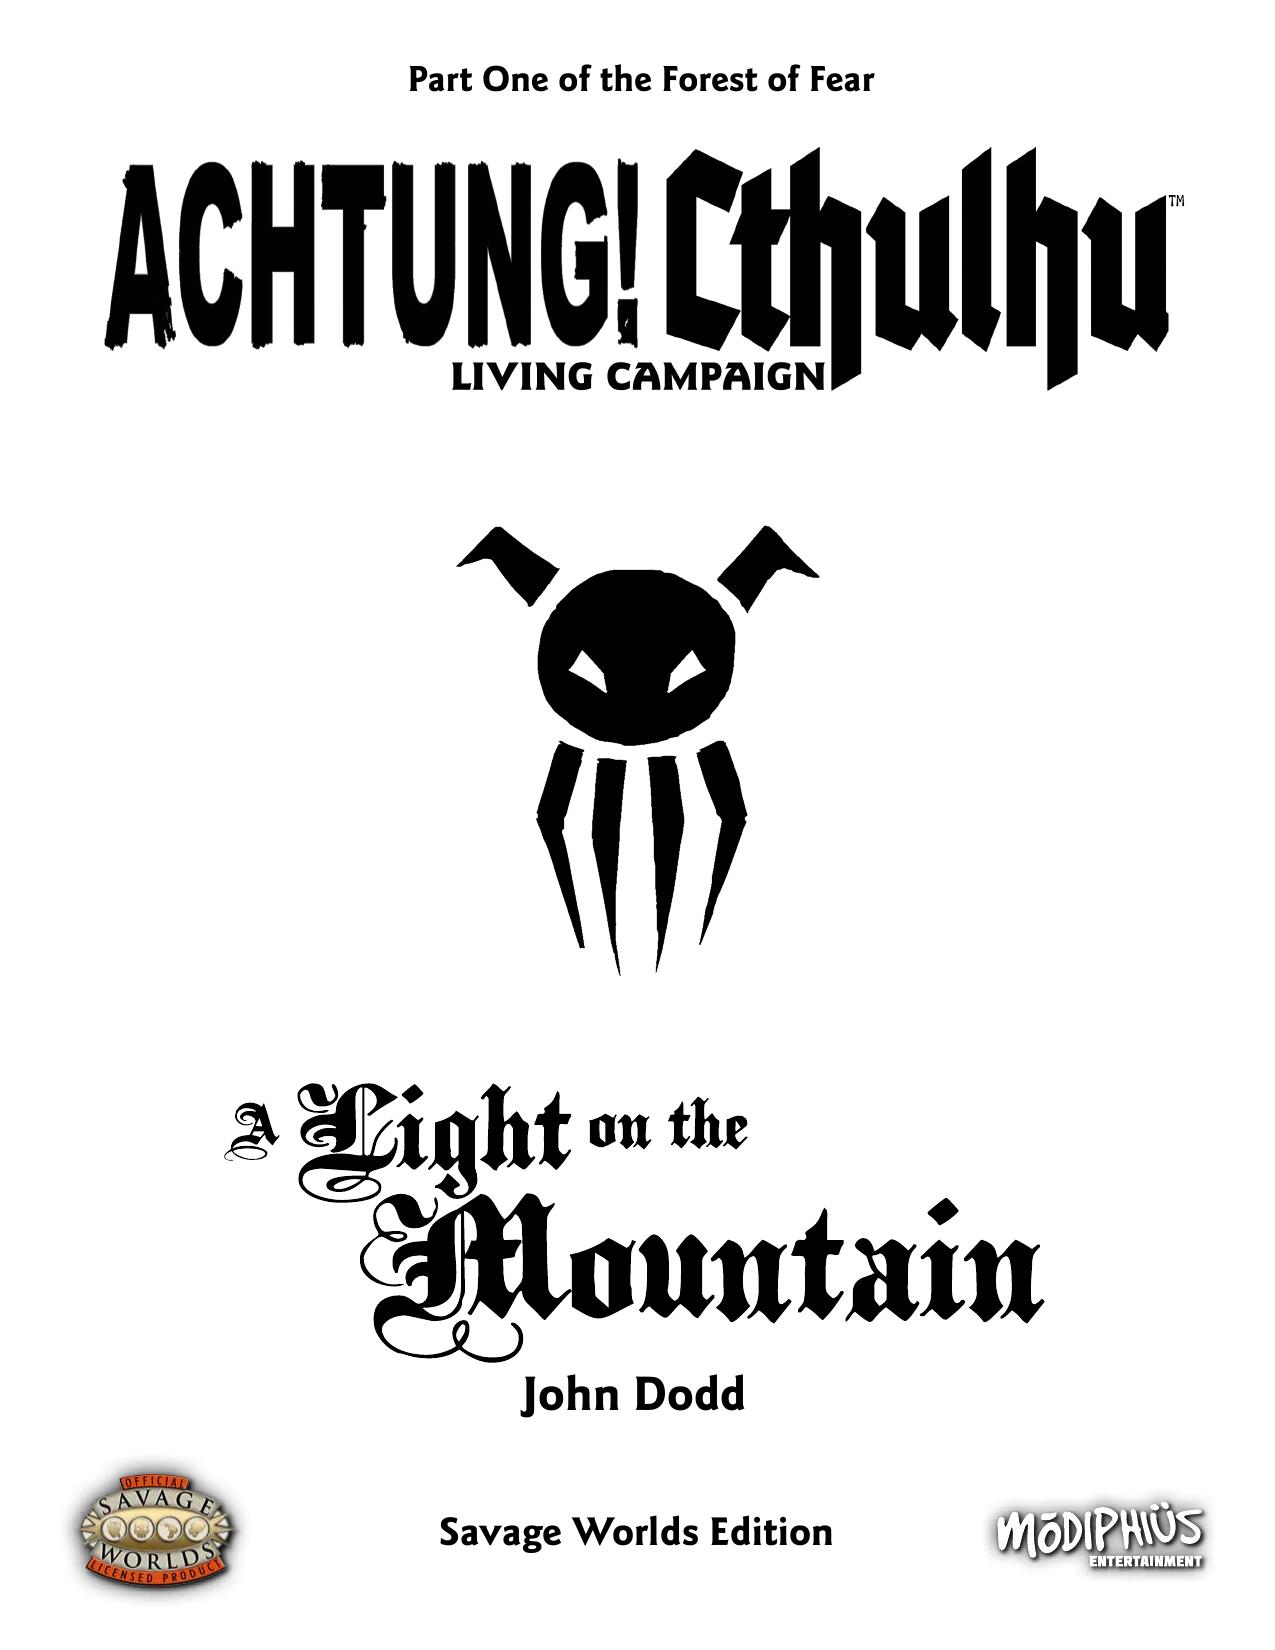 Achtung! Cthulhu - Forest of Fear 01